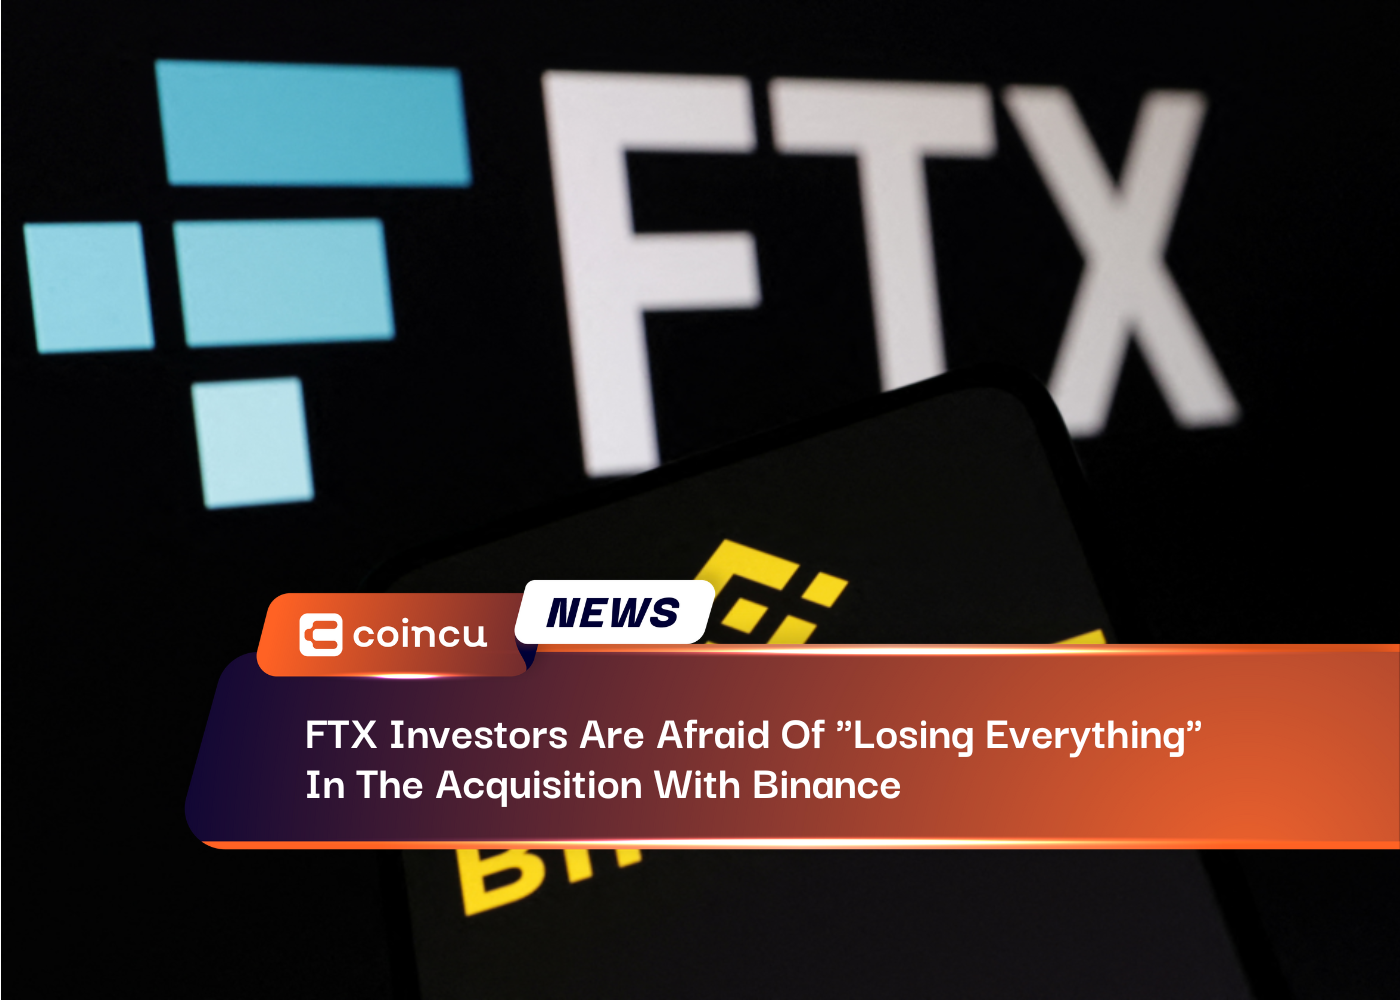 FTX Investors Are Afraid Of "Losing Everything" In The Acquisition With Binance